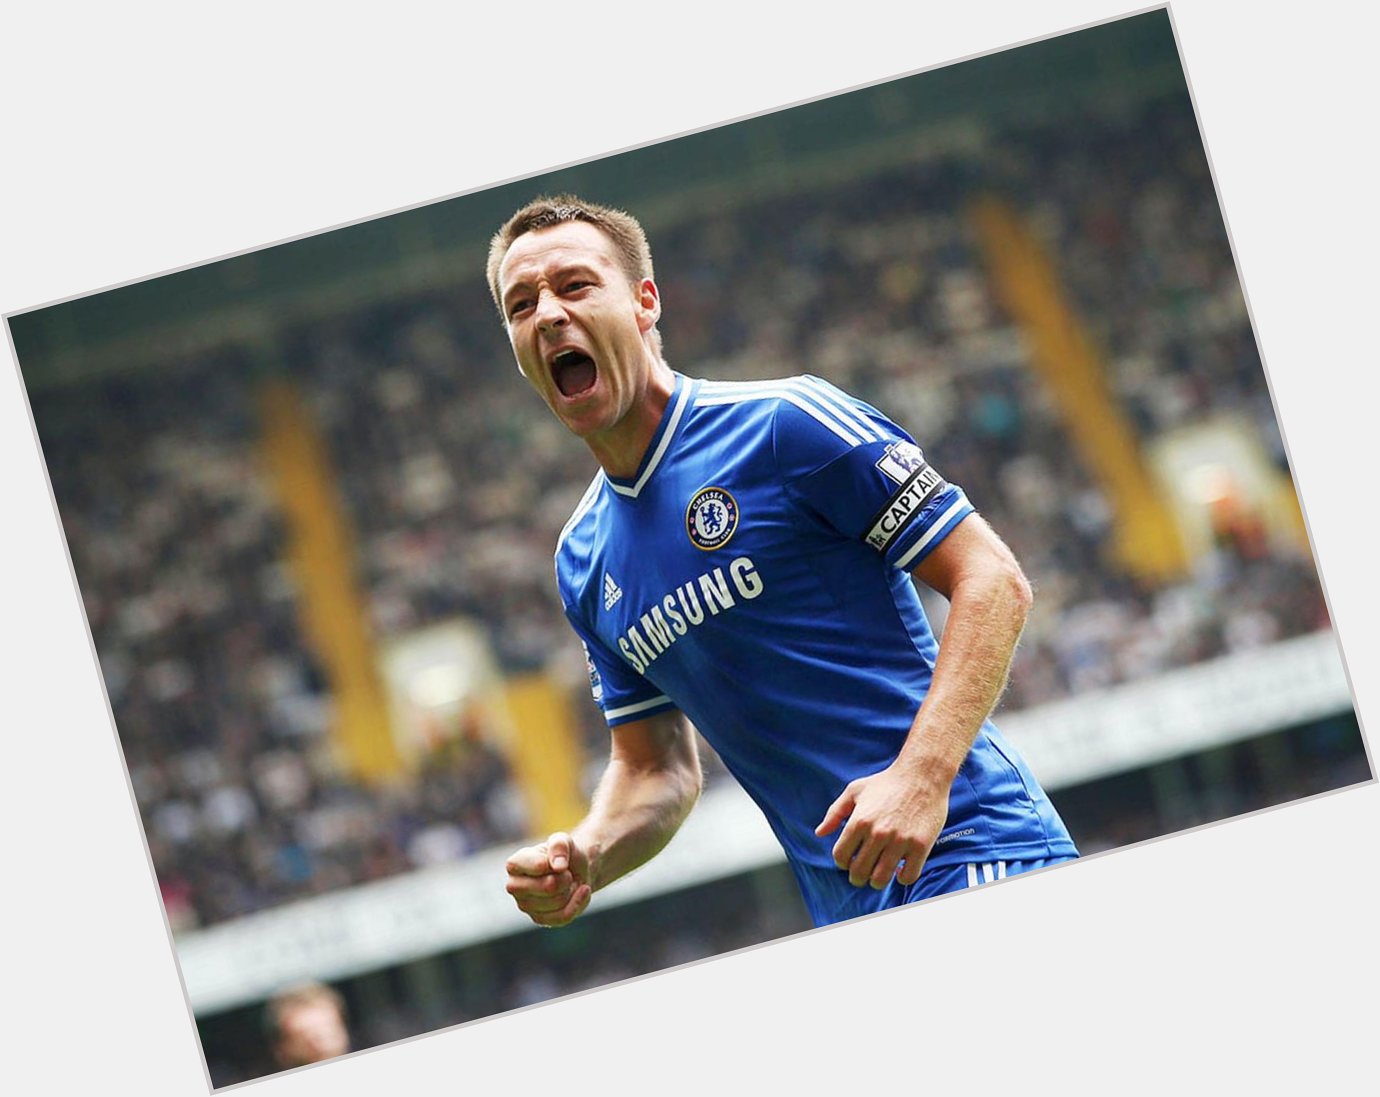 Happy birthday our respected captain John Terry! May you live long.  